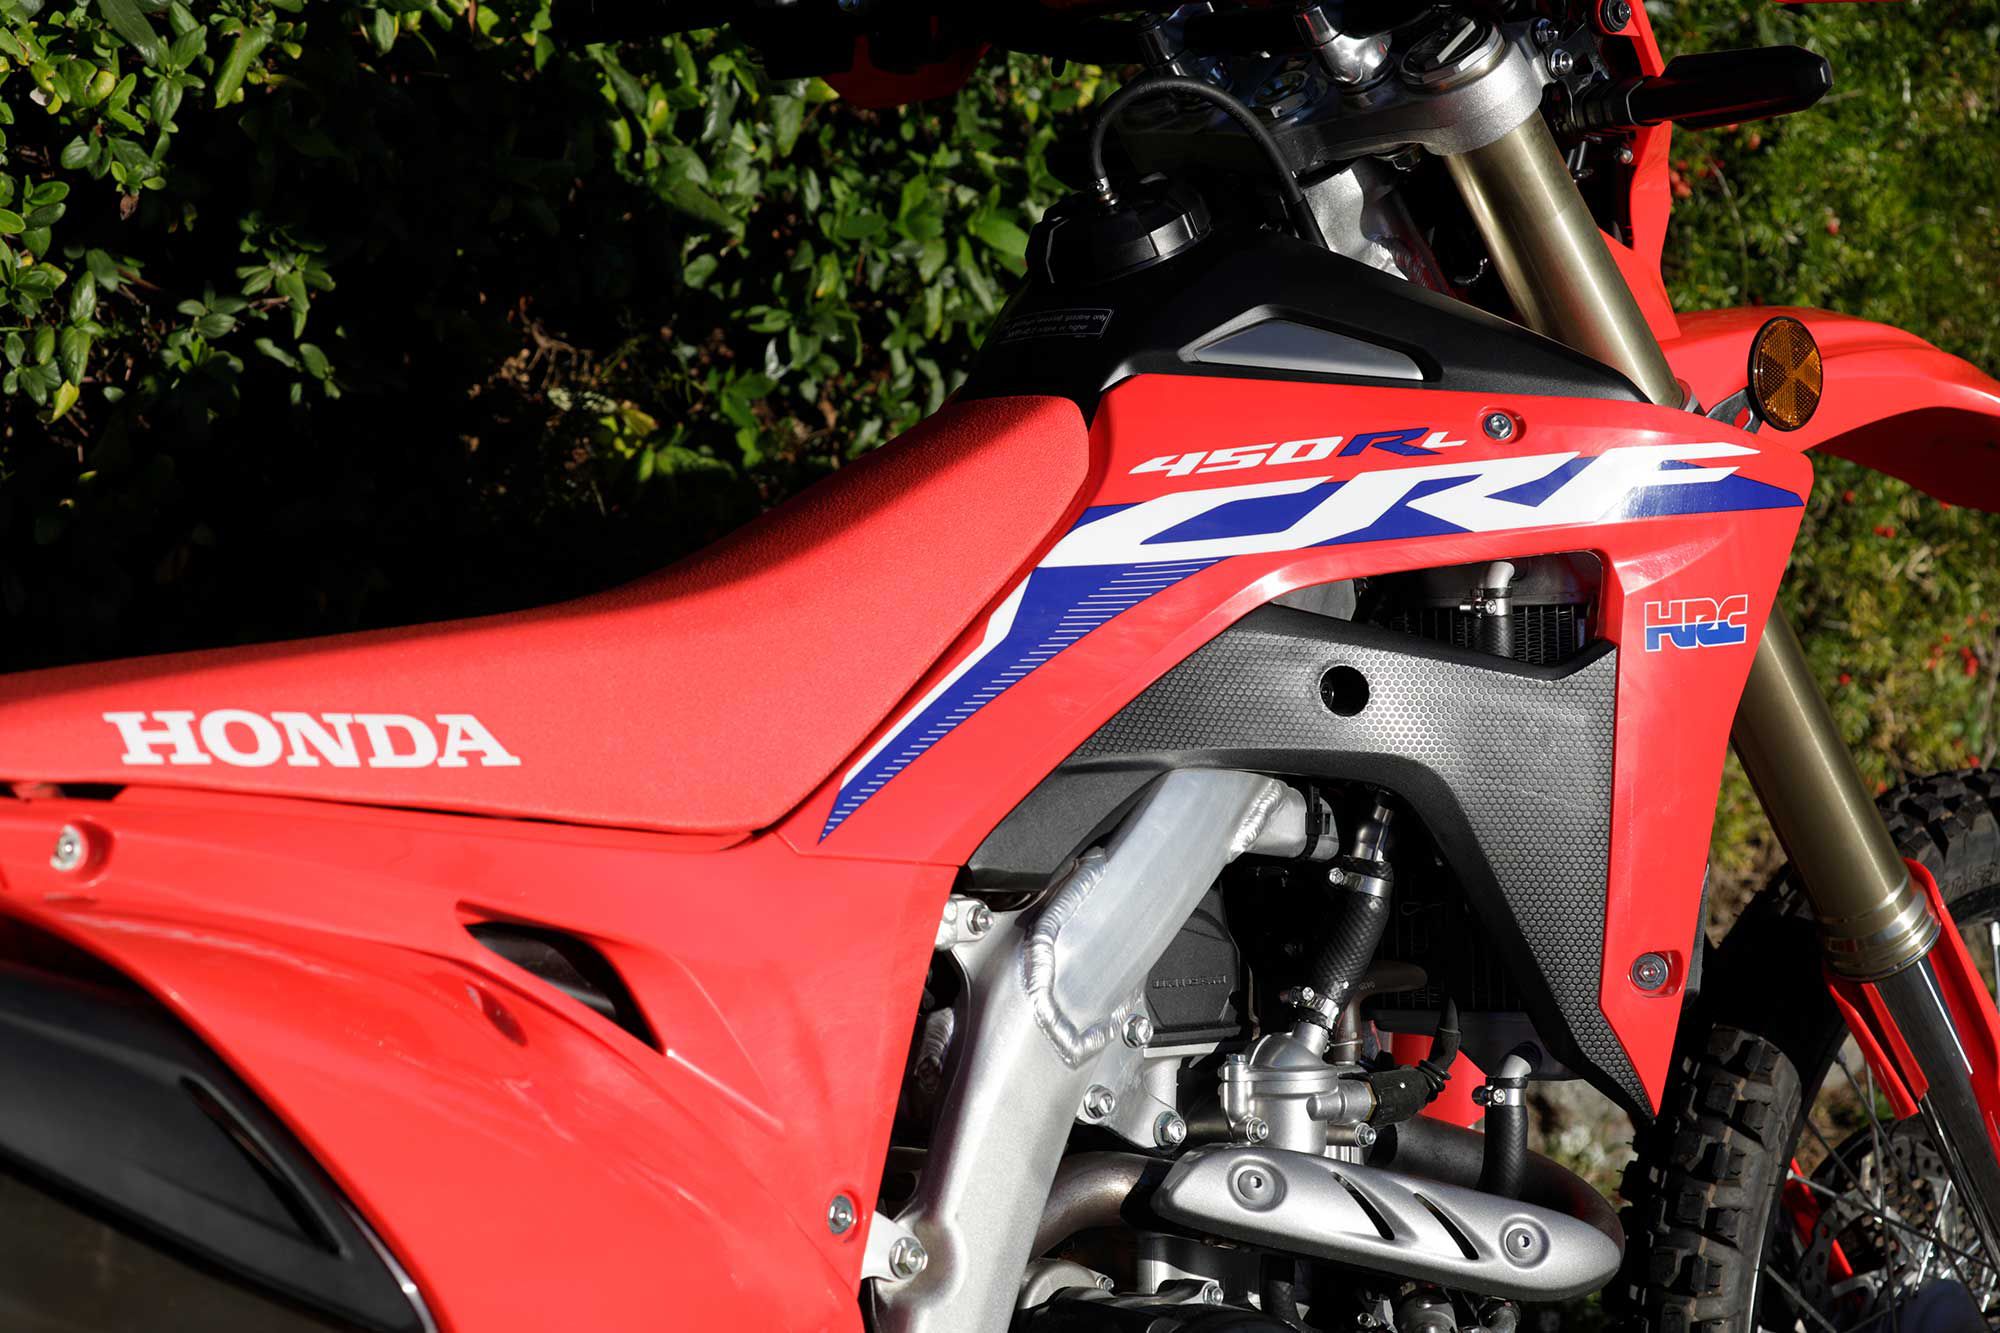 Because it’s a dirt bike, Honda’s CRF450RL offers room only for the rider. The seat height is tall compared to most streetbikes.